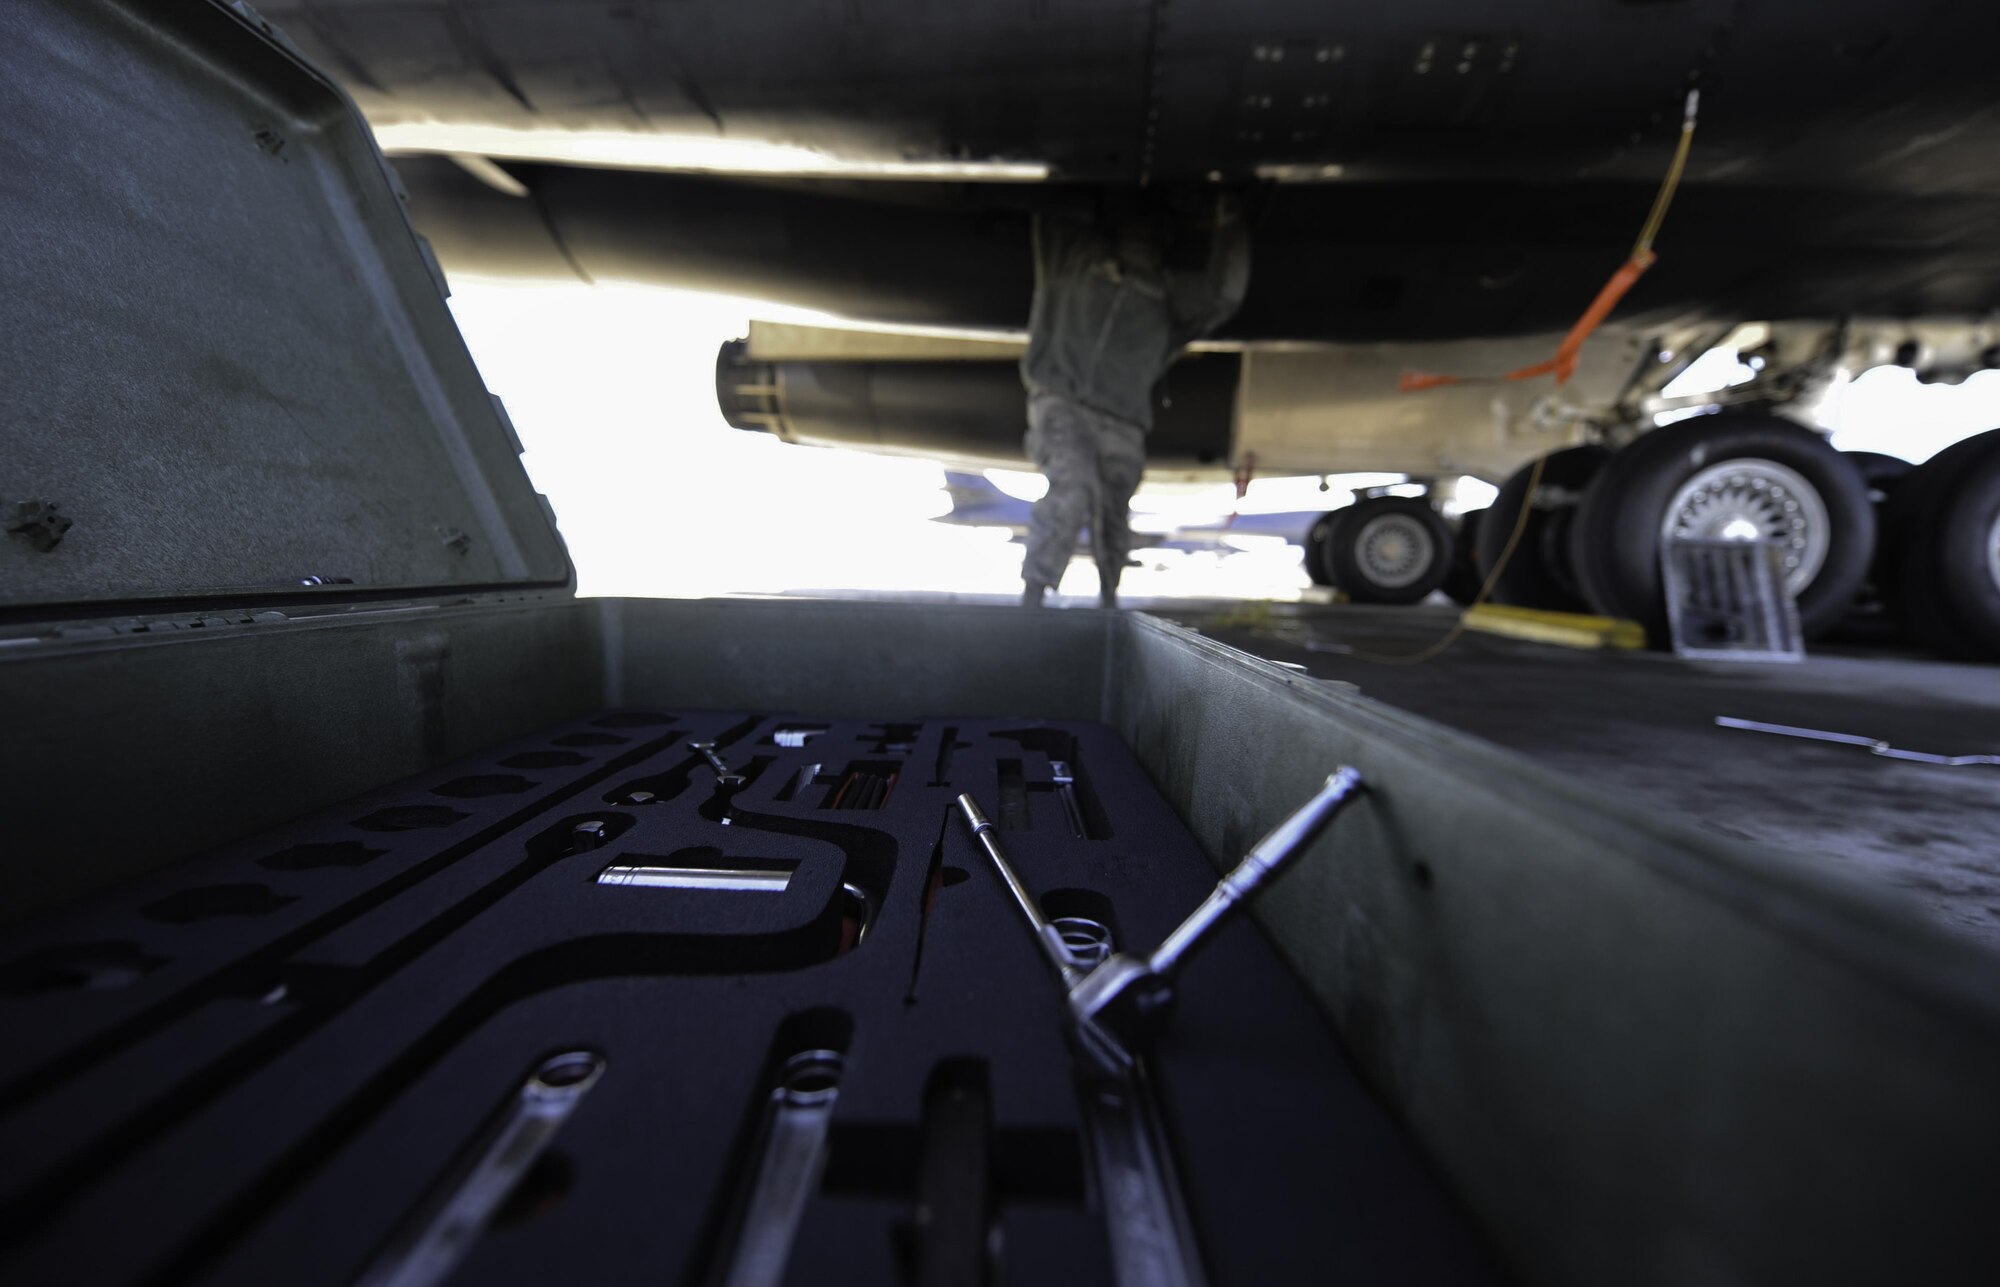 Airman 1st Class Jaylin King, an aerospace propulsion apprentice assigned to the 28th Aircraft Maintenance Squadron, Ellsworth Air Force Base, S.D., performs maintenance on a grounded B-1B Lancer during Red Flag 17-1 on Nellis Air Force Base, Nev., Jan. 27, 2017. Aircraft and personnel deploy to Nellis AFB for Red Flag under the Air Expeditionary Force concept and make up the exercise’s ‘Blue” forces. (U.S. Air Force photo by Airman 1st Class Kevin Tanenbaum/Released)